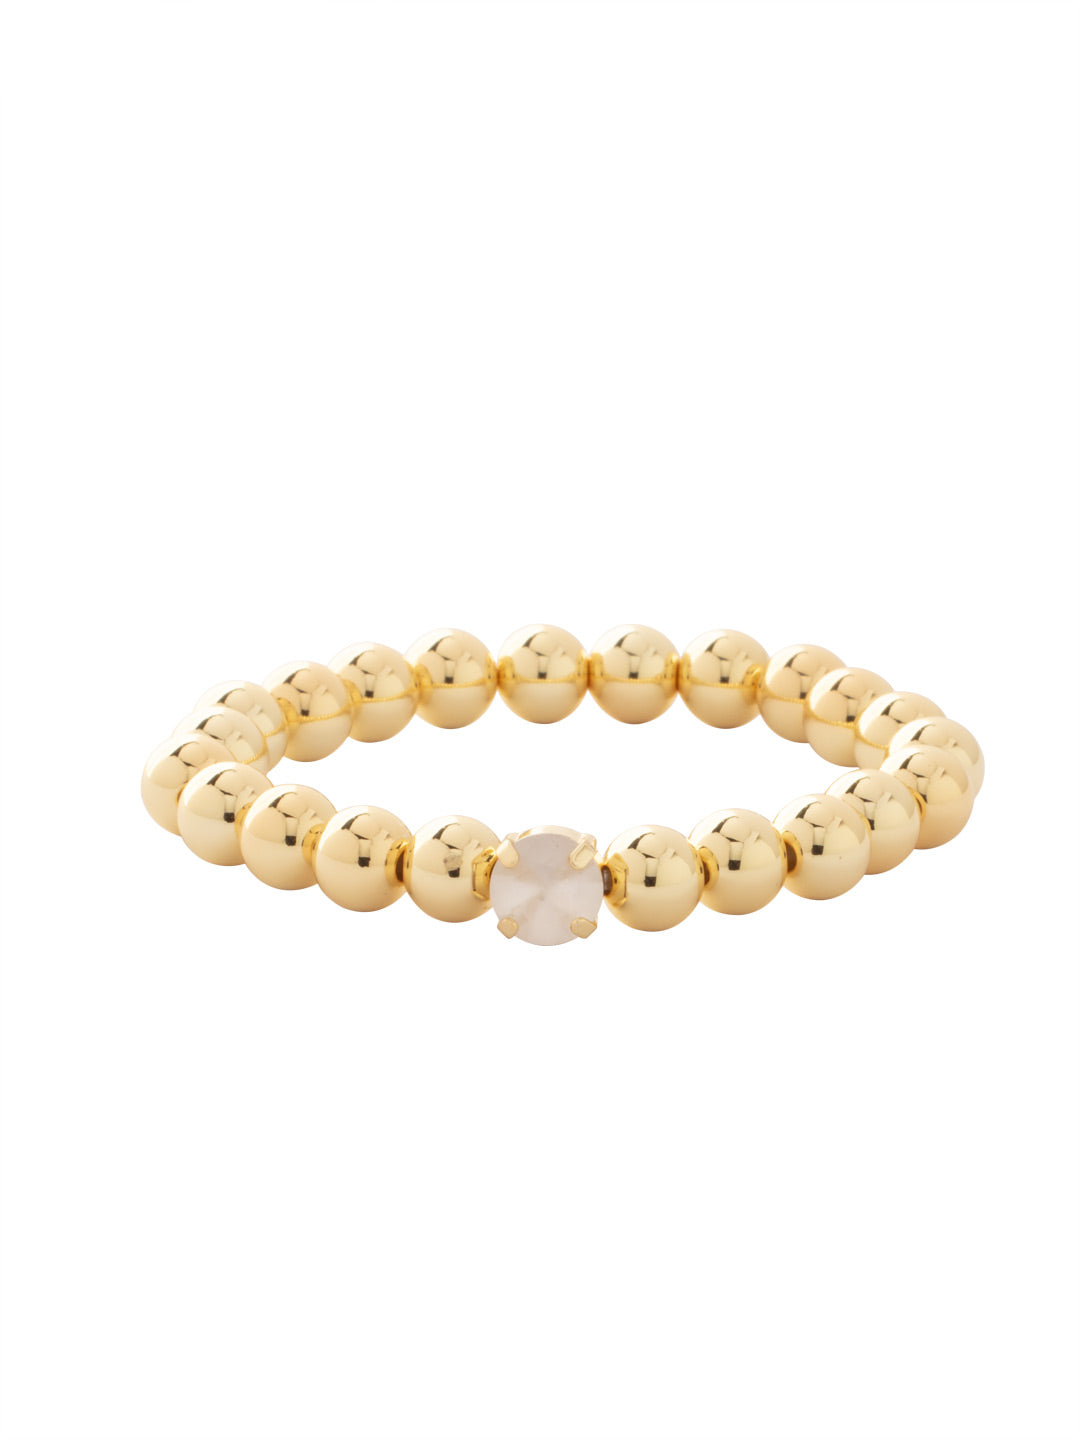 Single Crystal Stretch Bracelet - 4BFJ21BGFRC - <p>Single Crystal Stretch Bracelet features repeating metal beads and a single round cut crystal on a multi-layered stretchy jewelry filament, creating a durable and trendy piece. From Sorrelli's Frosted Crystal collection in our Bright Gold-tone finish.</p>